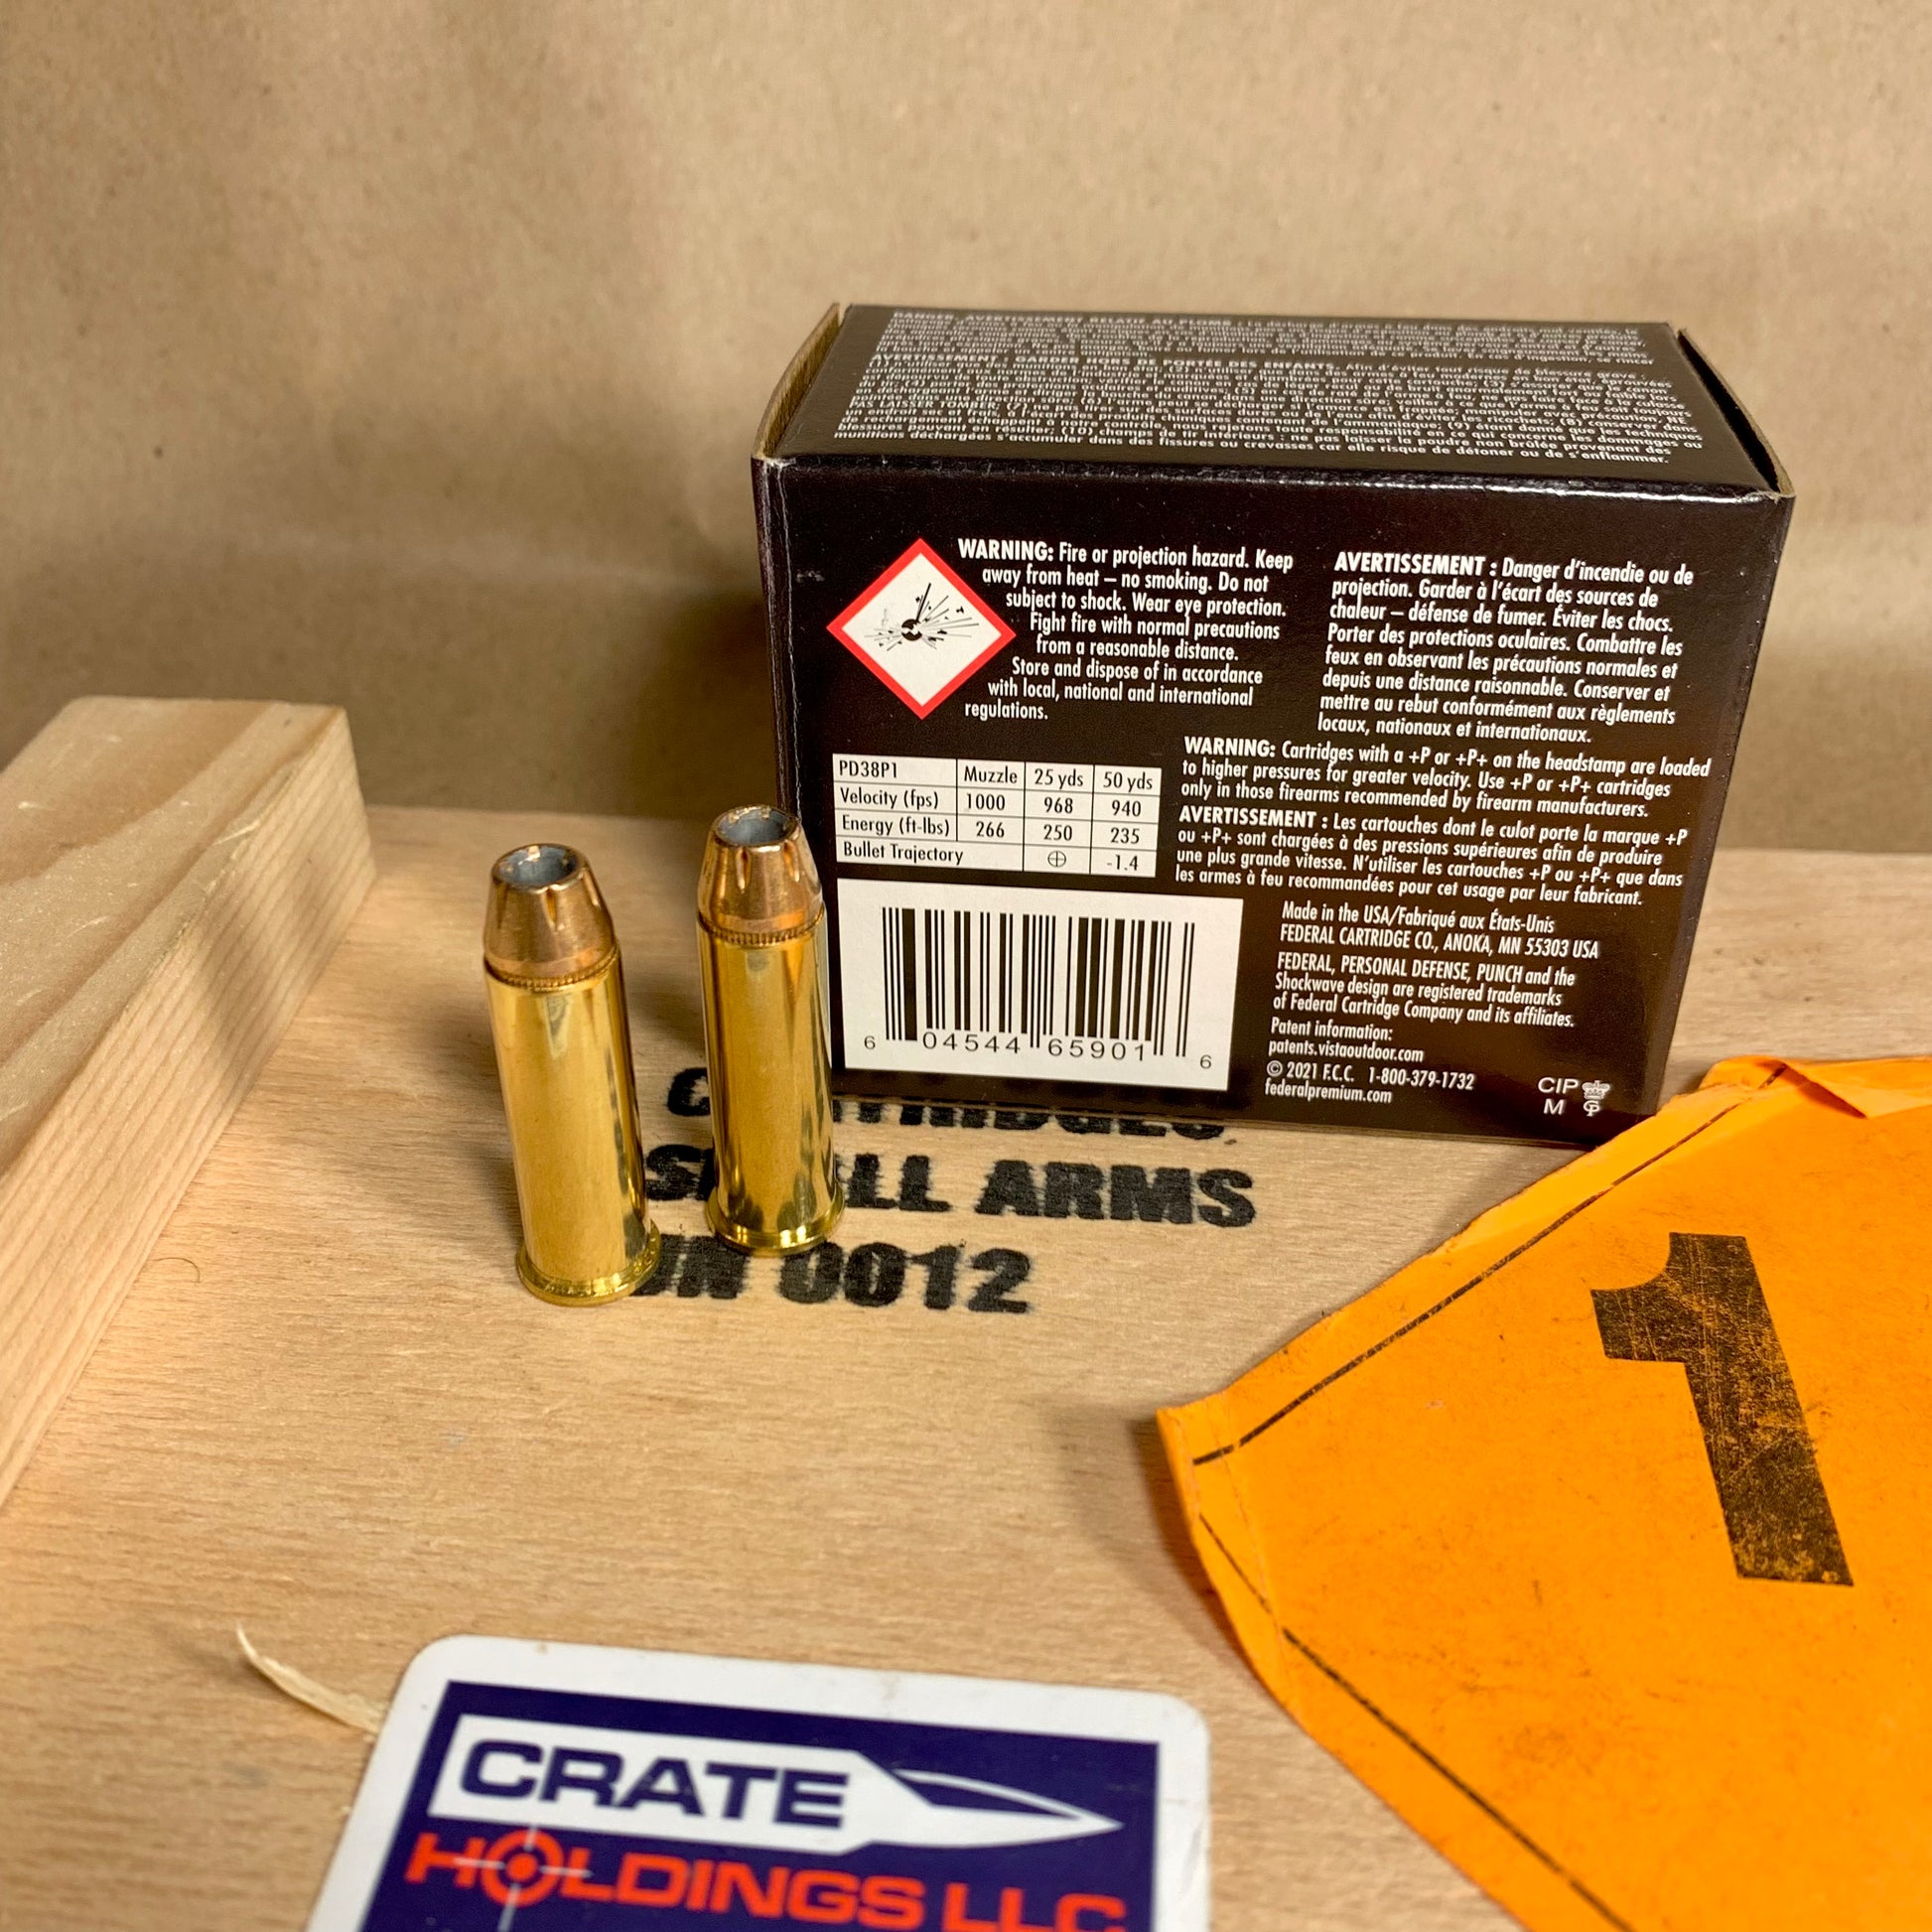 20 Round Box Federal Punch .38 Special +P Ammo 120gr JHP - PD38P1